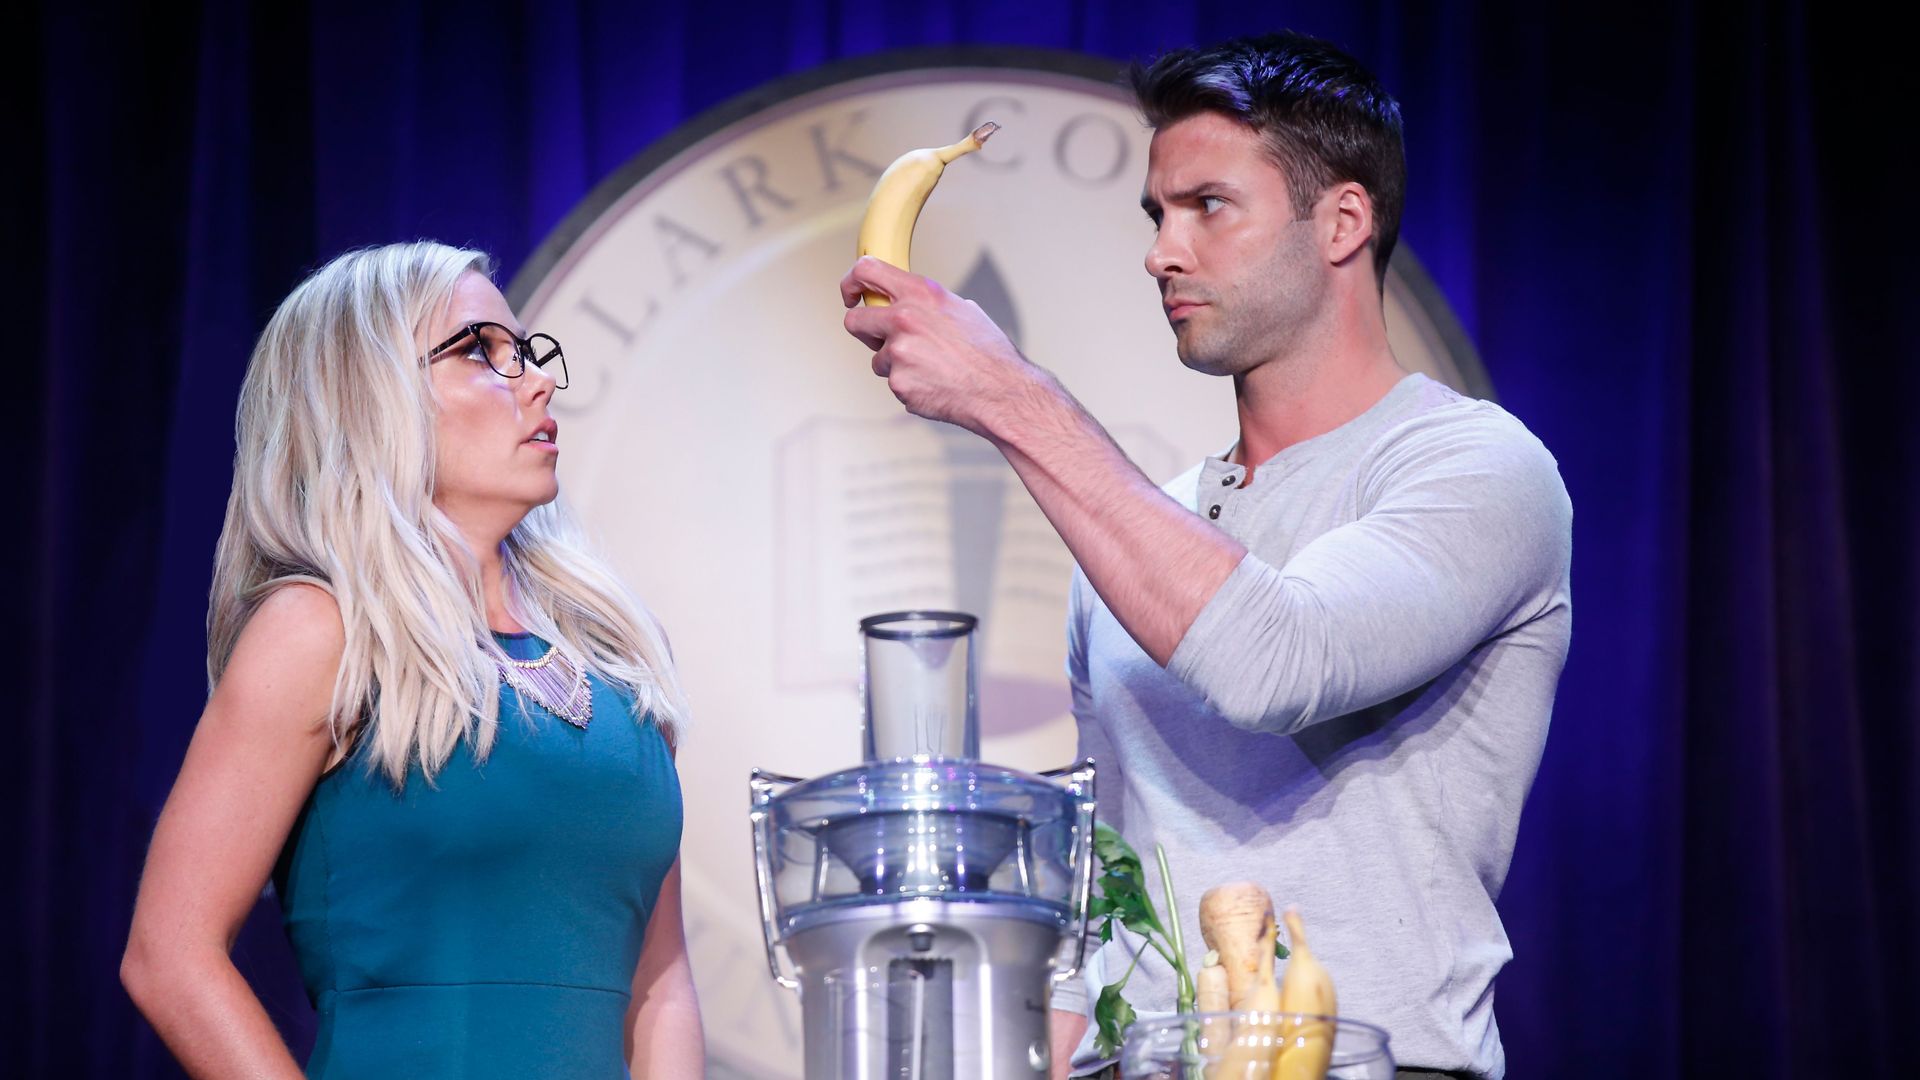 People on stage with a banana